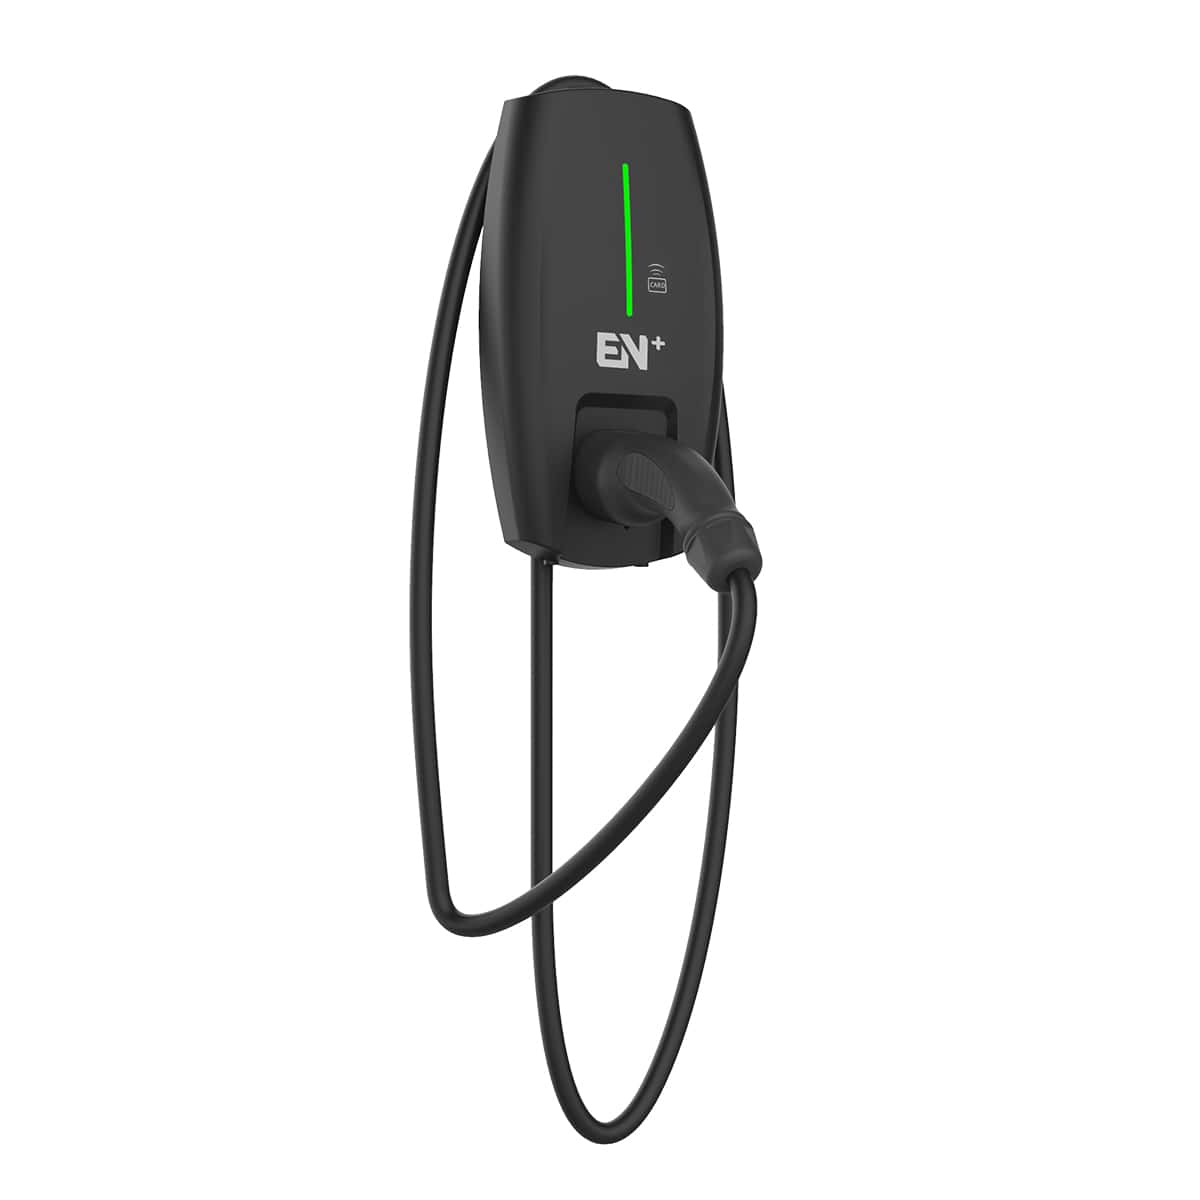 EN+ 7kW Smart Home EV Charge Point, 7m tethered